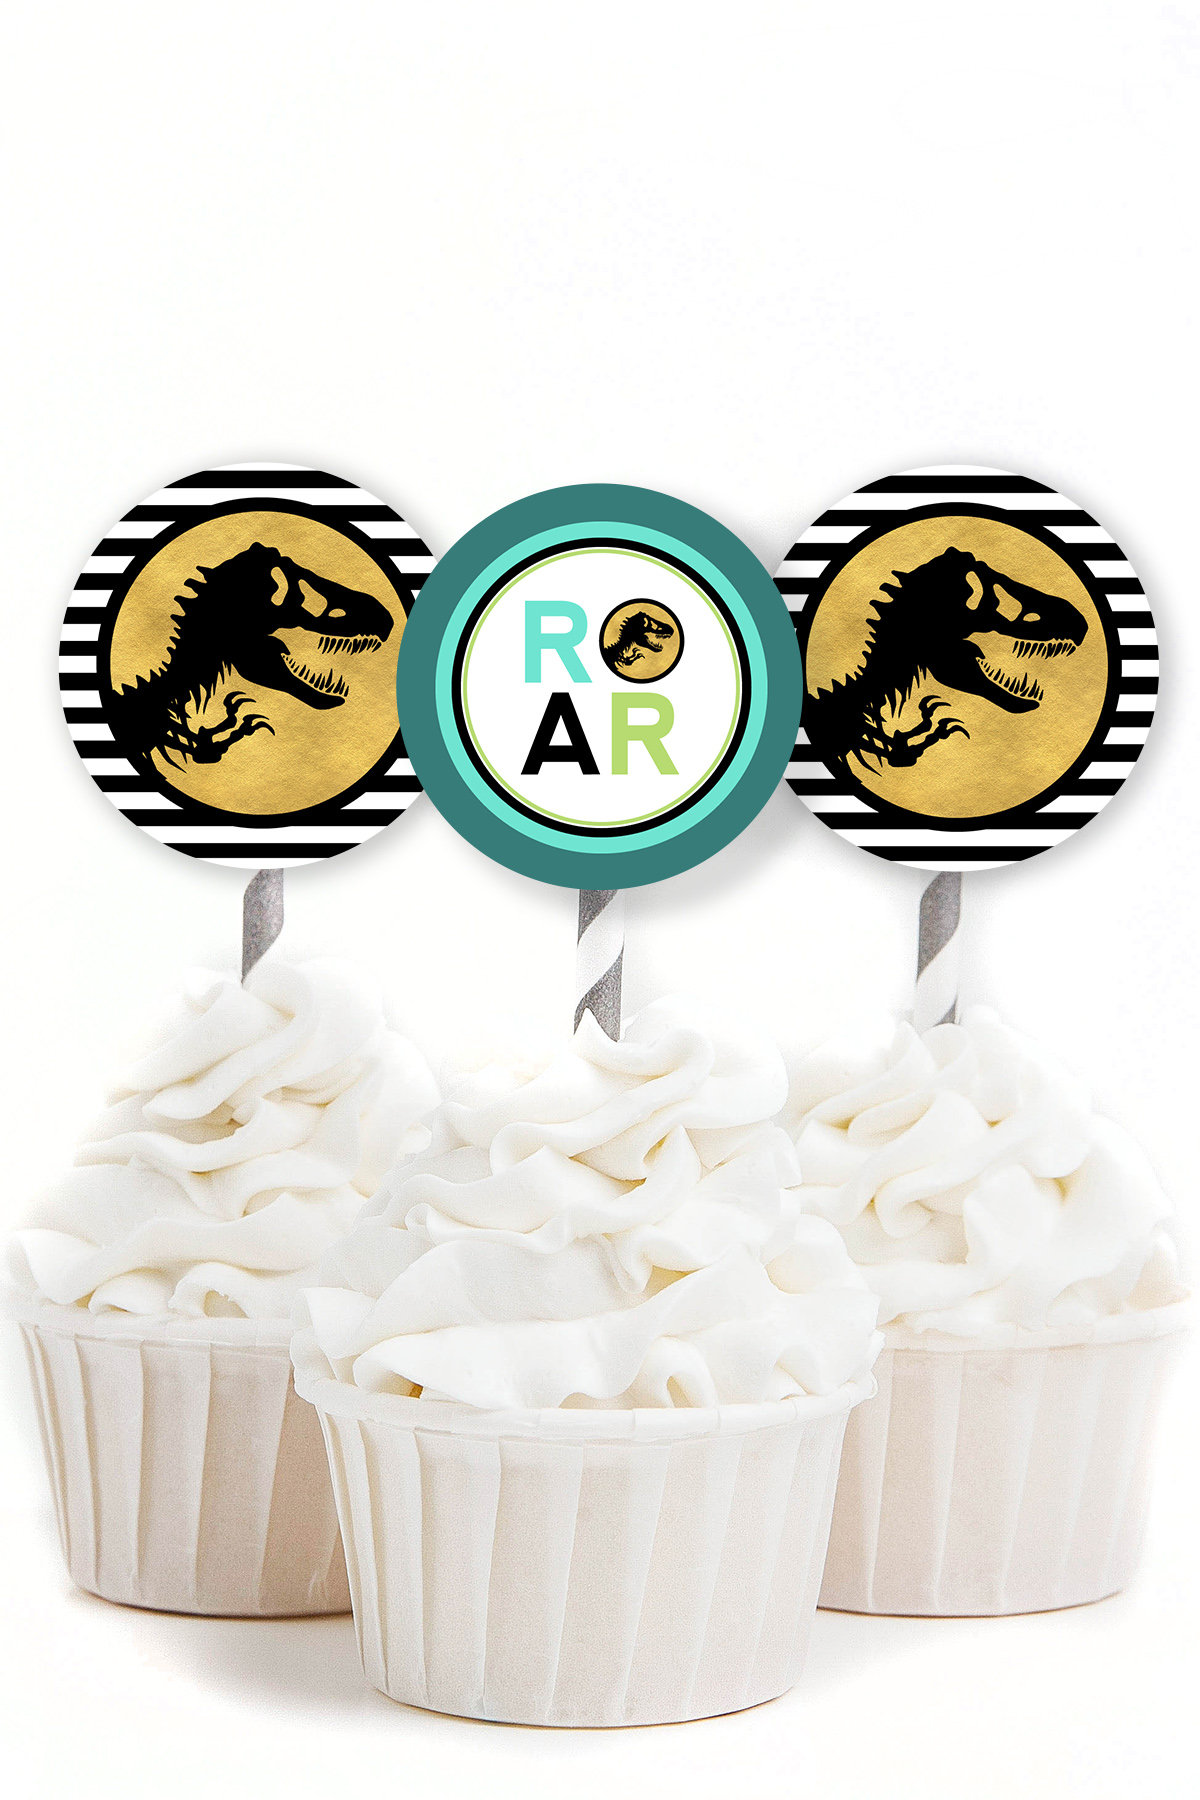 Free Printable Jurassic Park inspired cupcake toppers by MKKM Designs